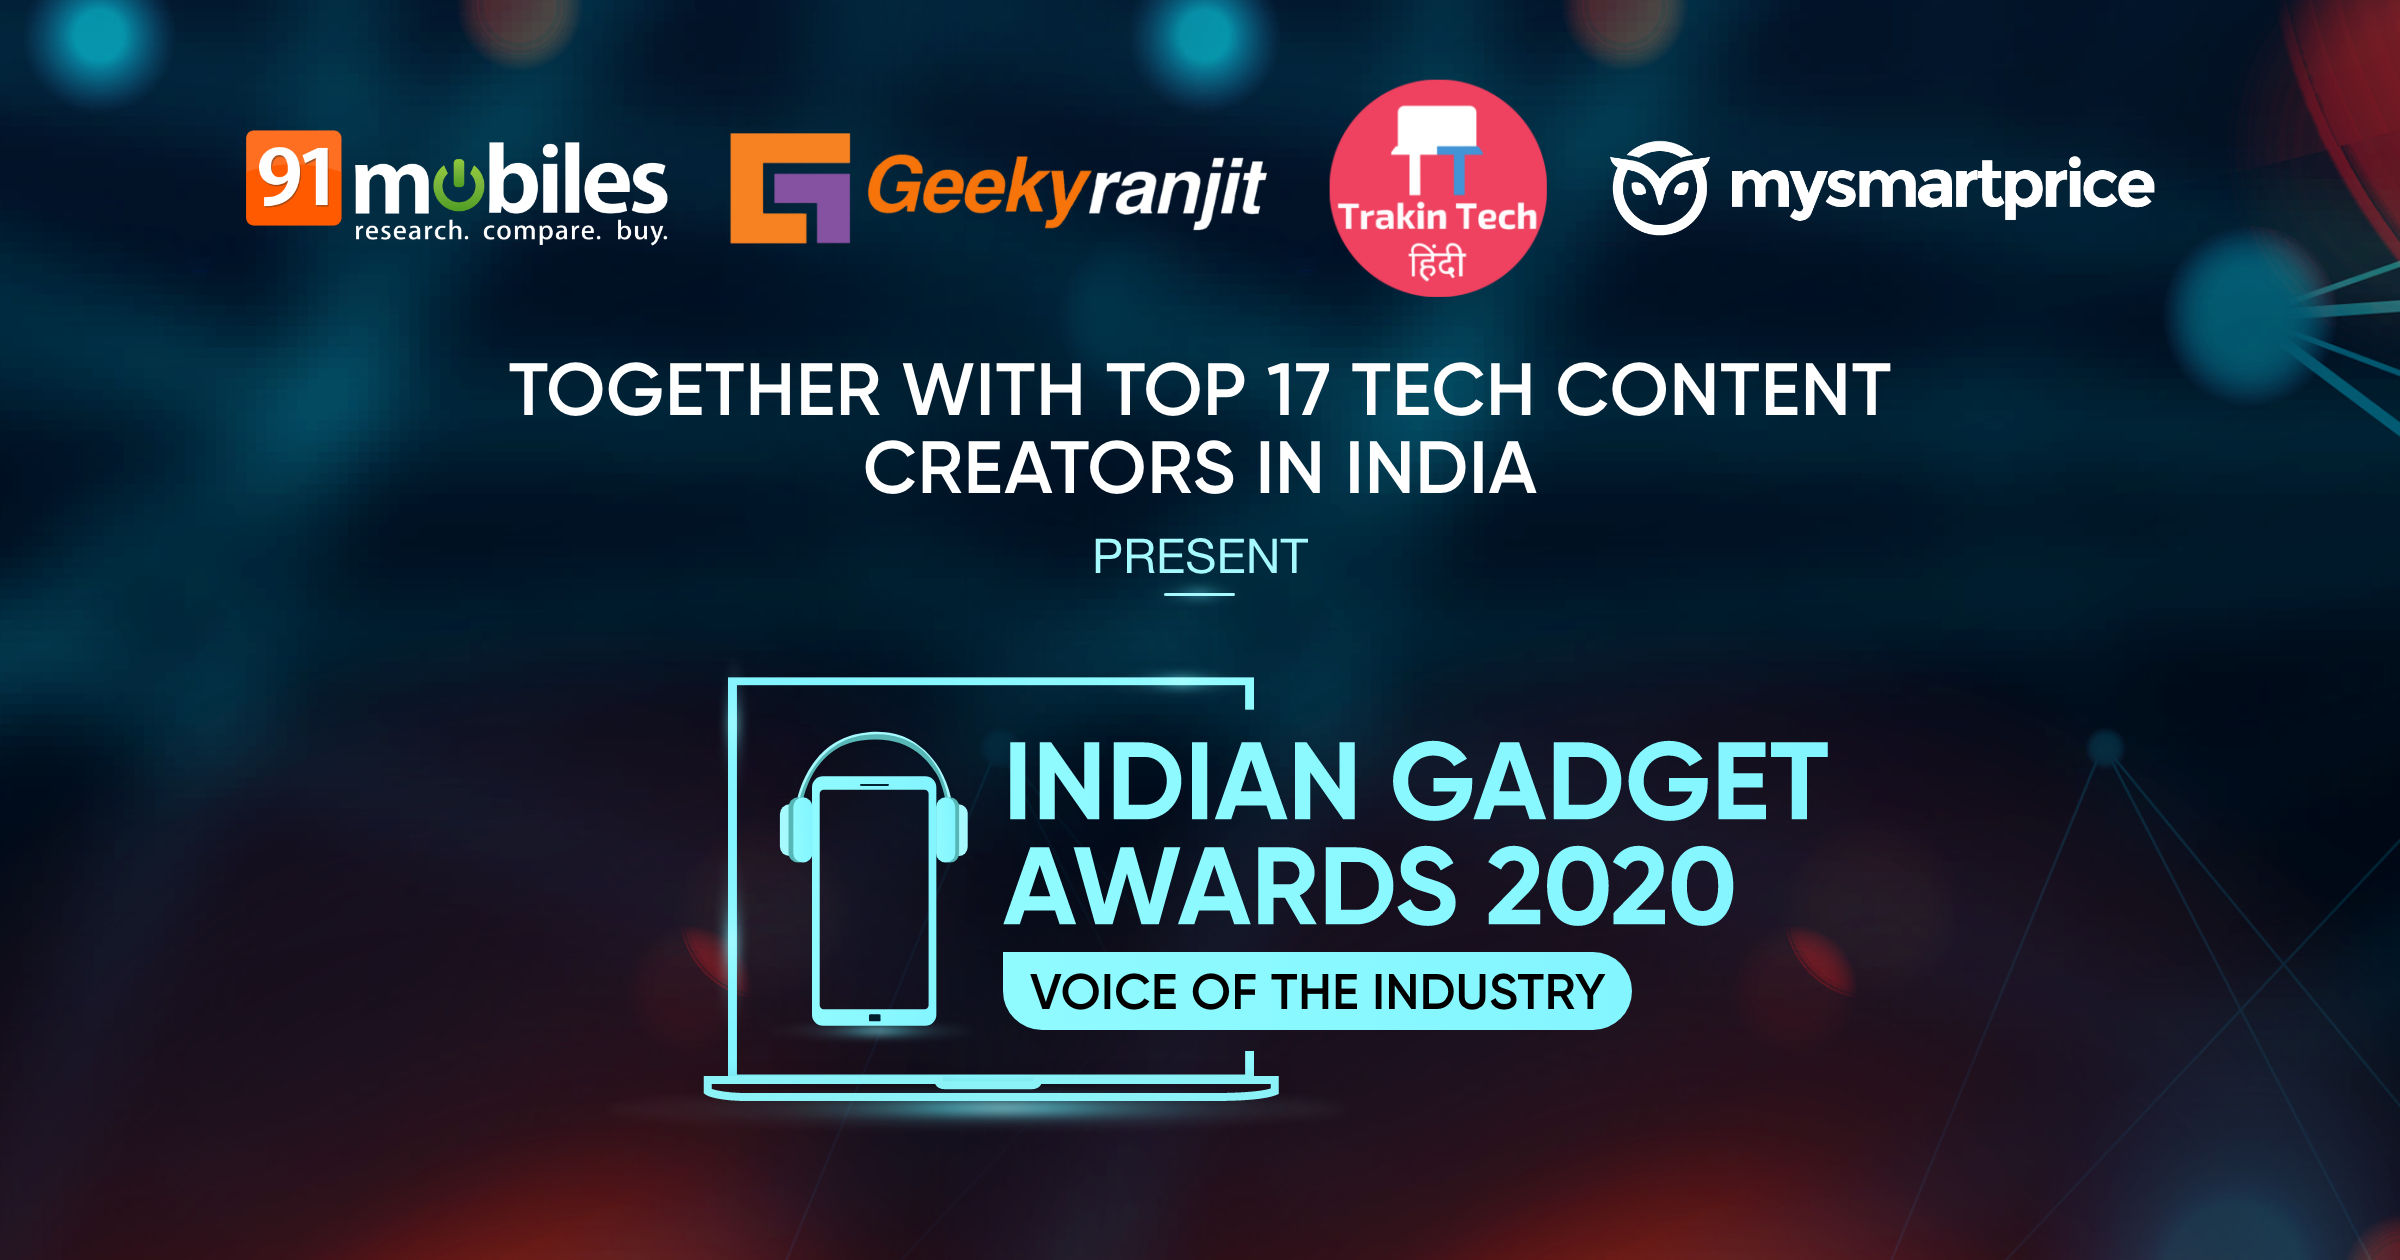 The Best Gadgets of 2020: Announcing the Indian Gadget Awards